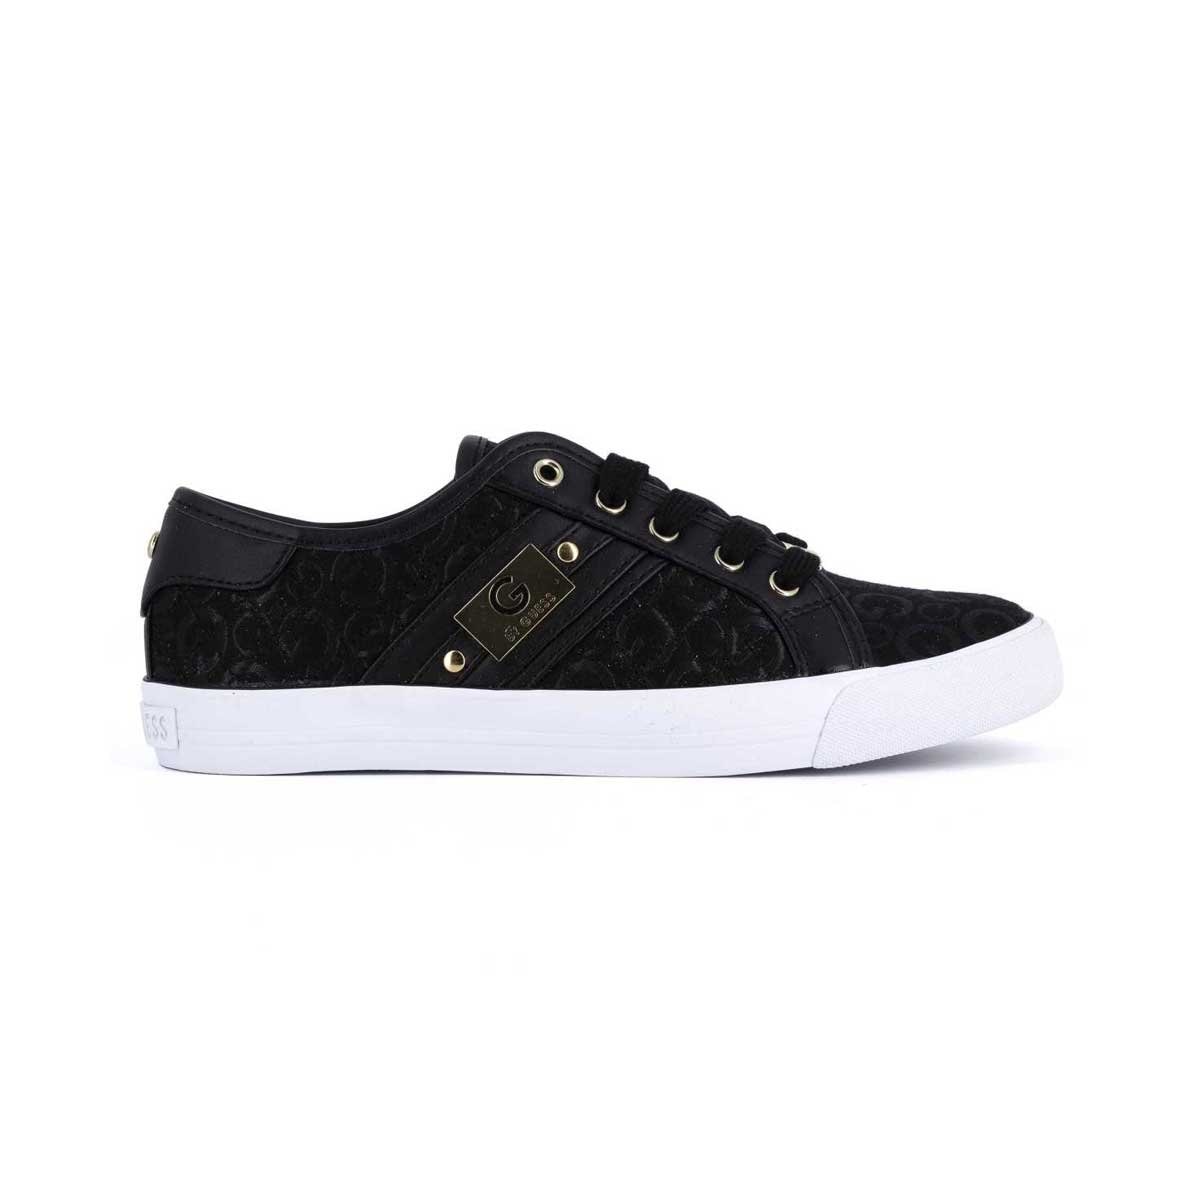 tenis guess negros mujer